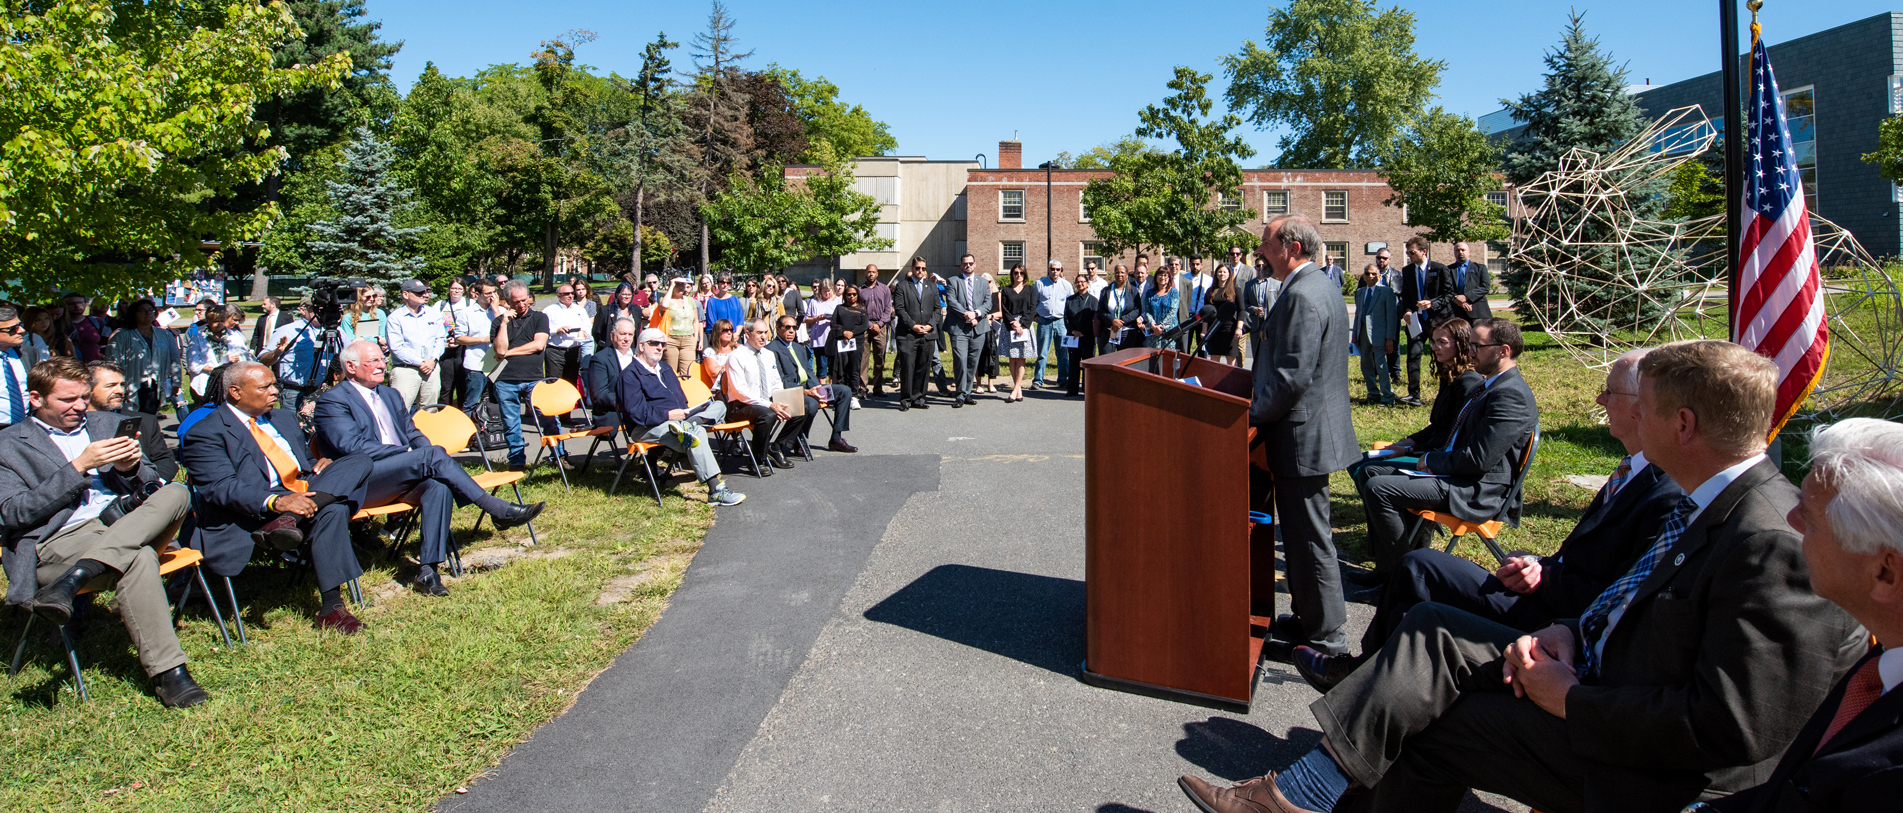 Dean Freedman speaking to the audience at the Ribbon Cutting Ceremony